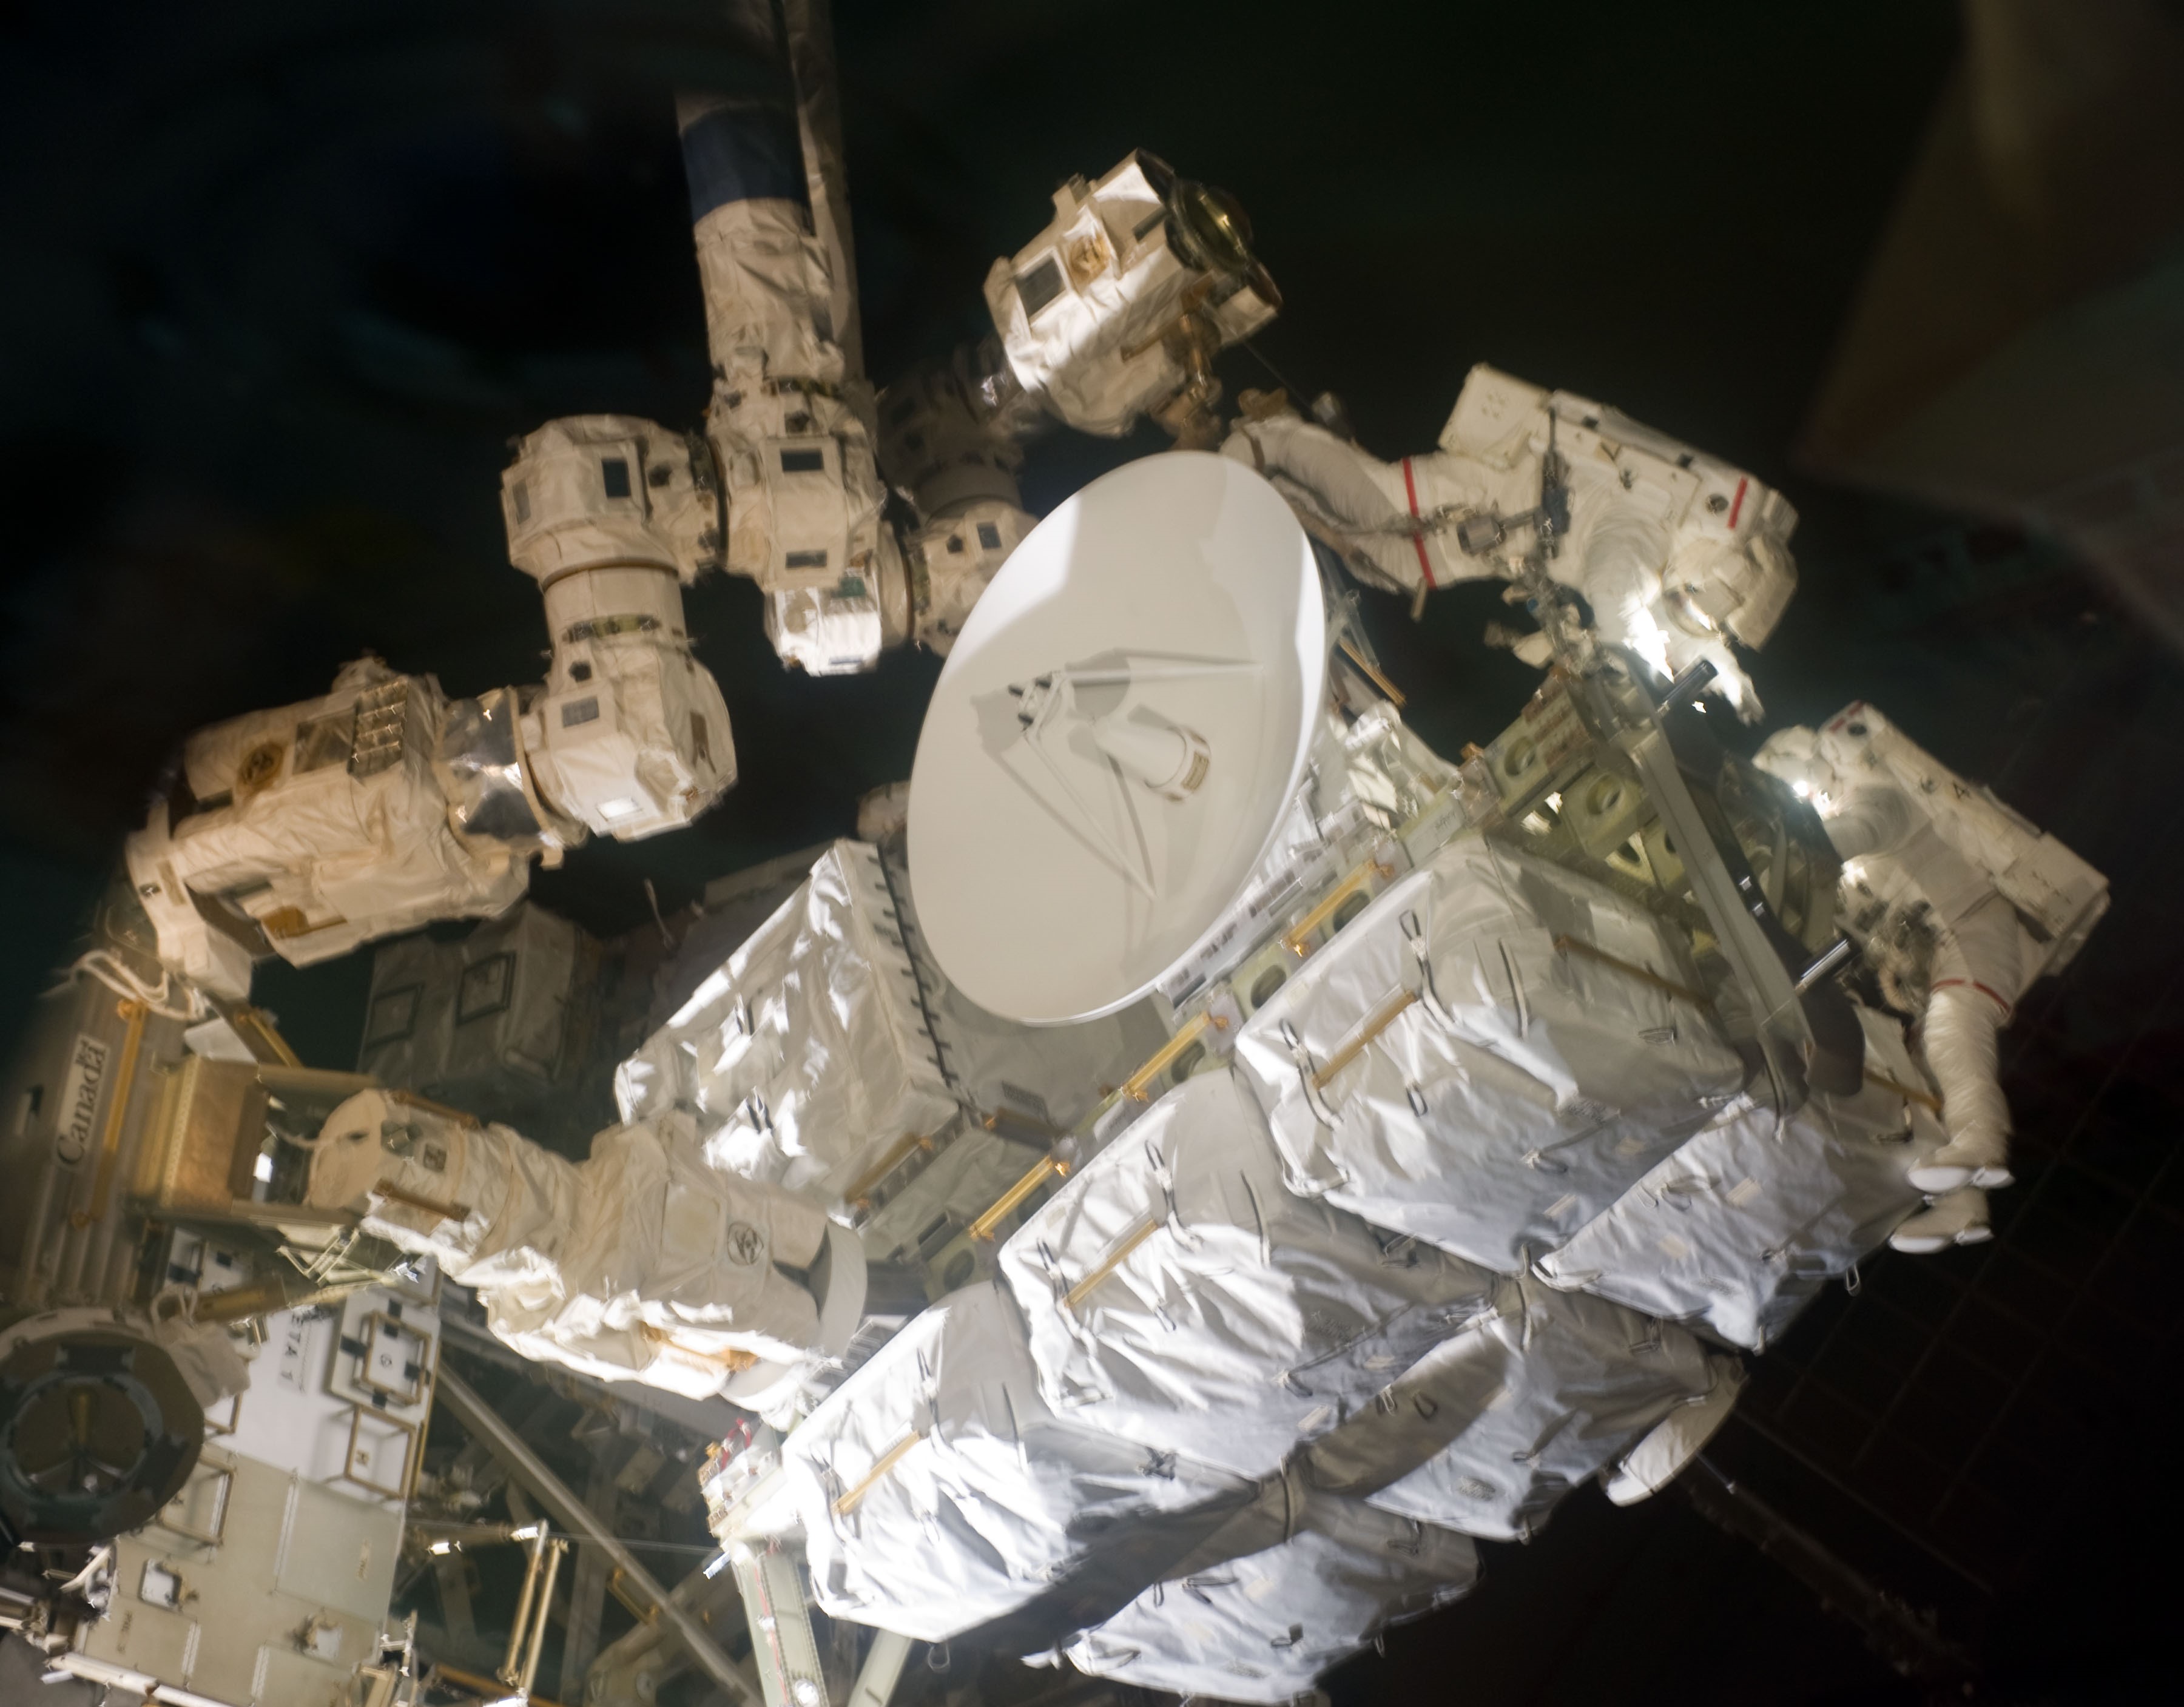 During the second spacewalk, David A. Wolf, left, and Thomas H. Marshburn transfer spare parts to the space station